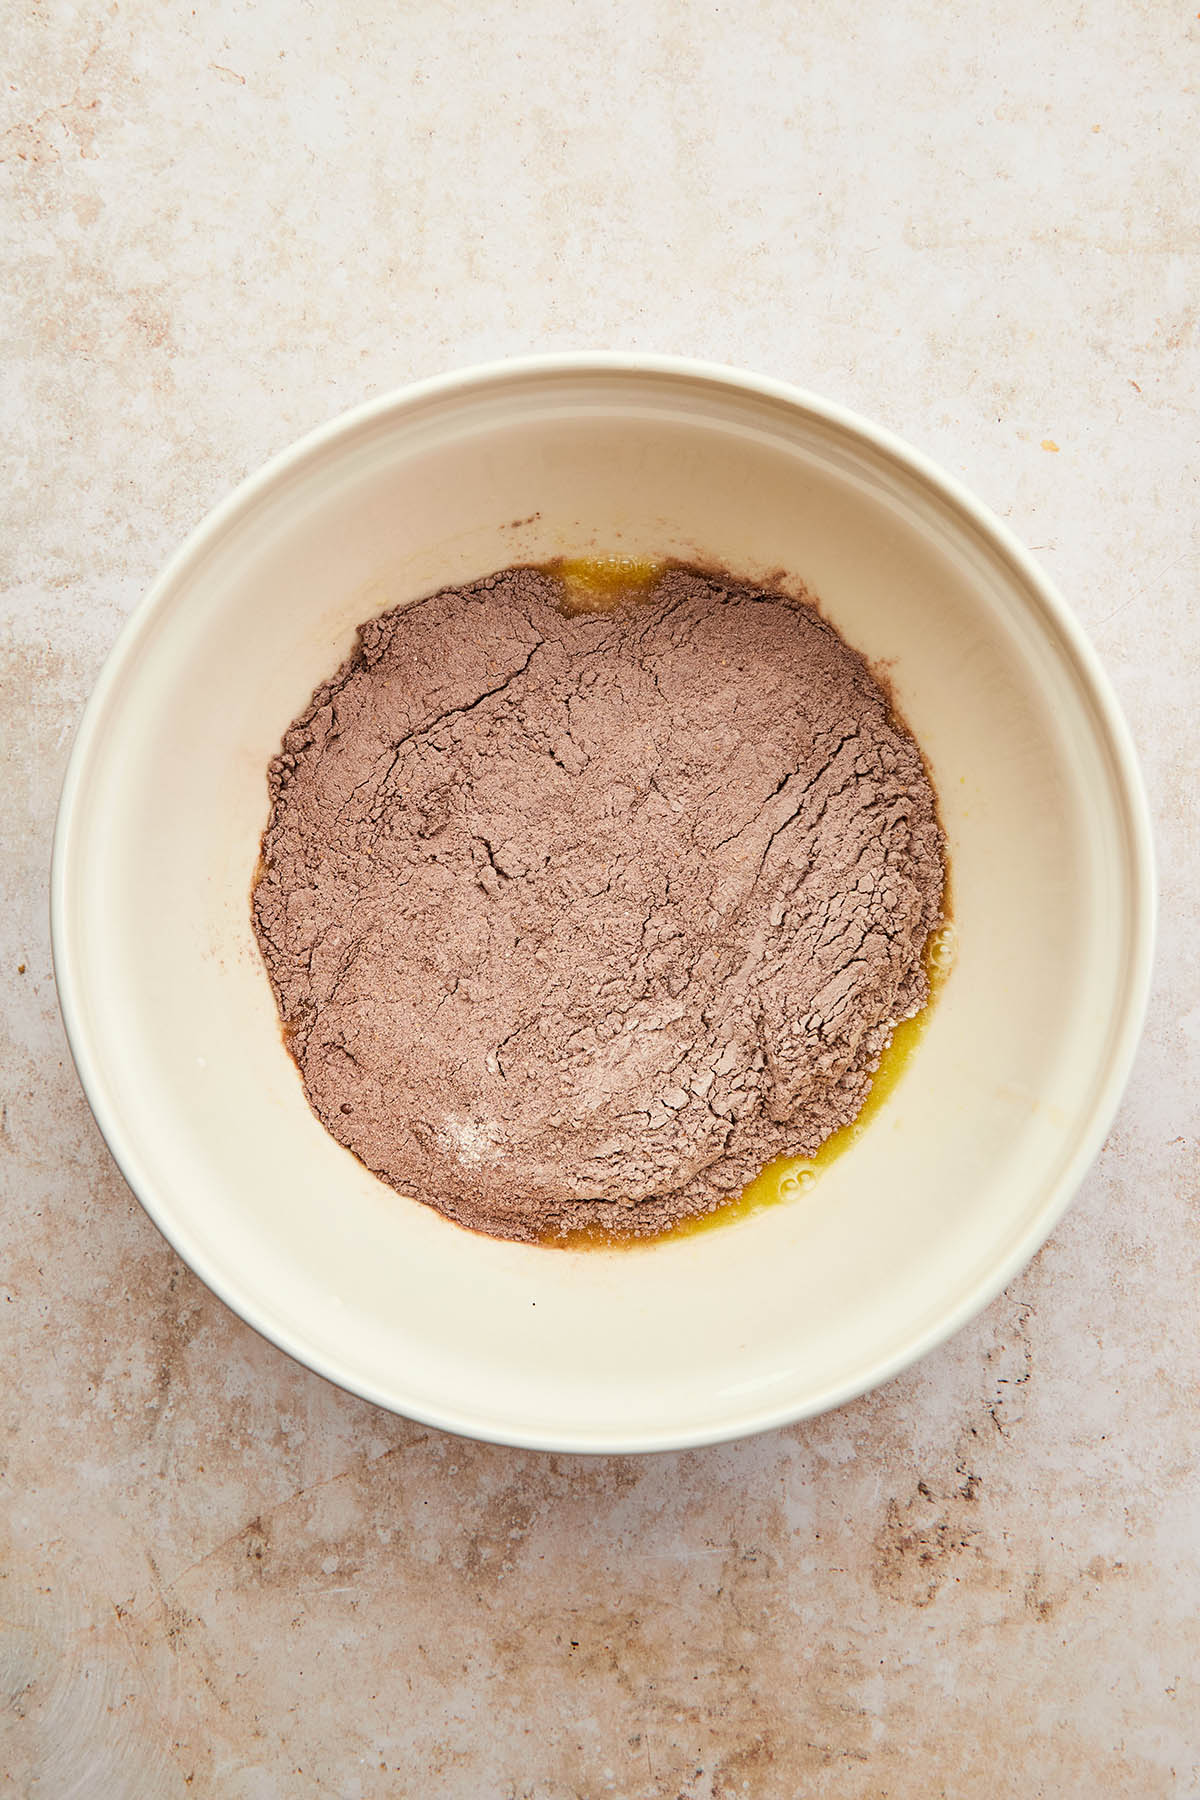 A bowl of unmixed wet and dry cake ingredients.